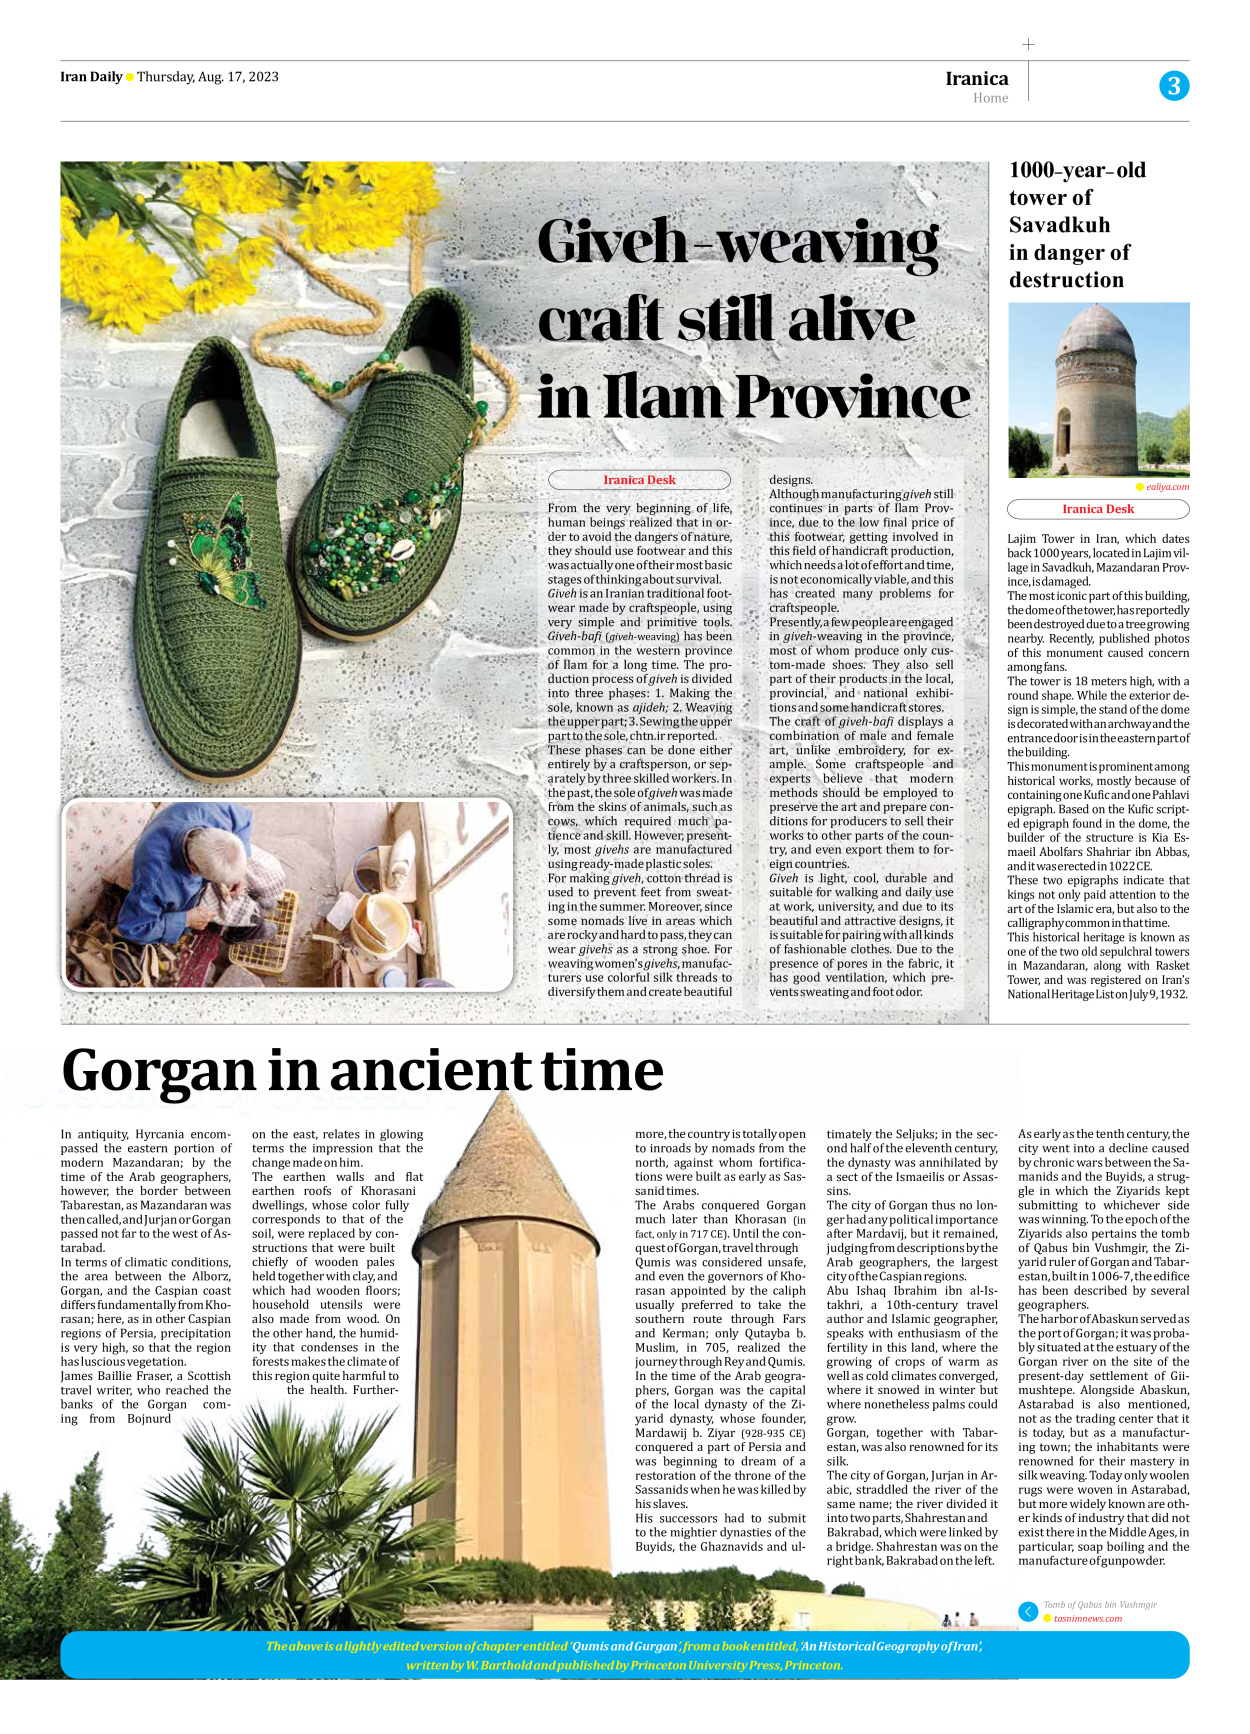 Iran Daily - Number Seven Thousand Three Hundred and Sixty Five - 17 August 2023 - Page 3